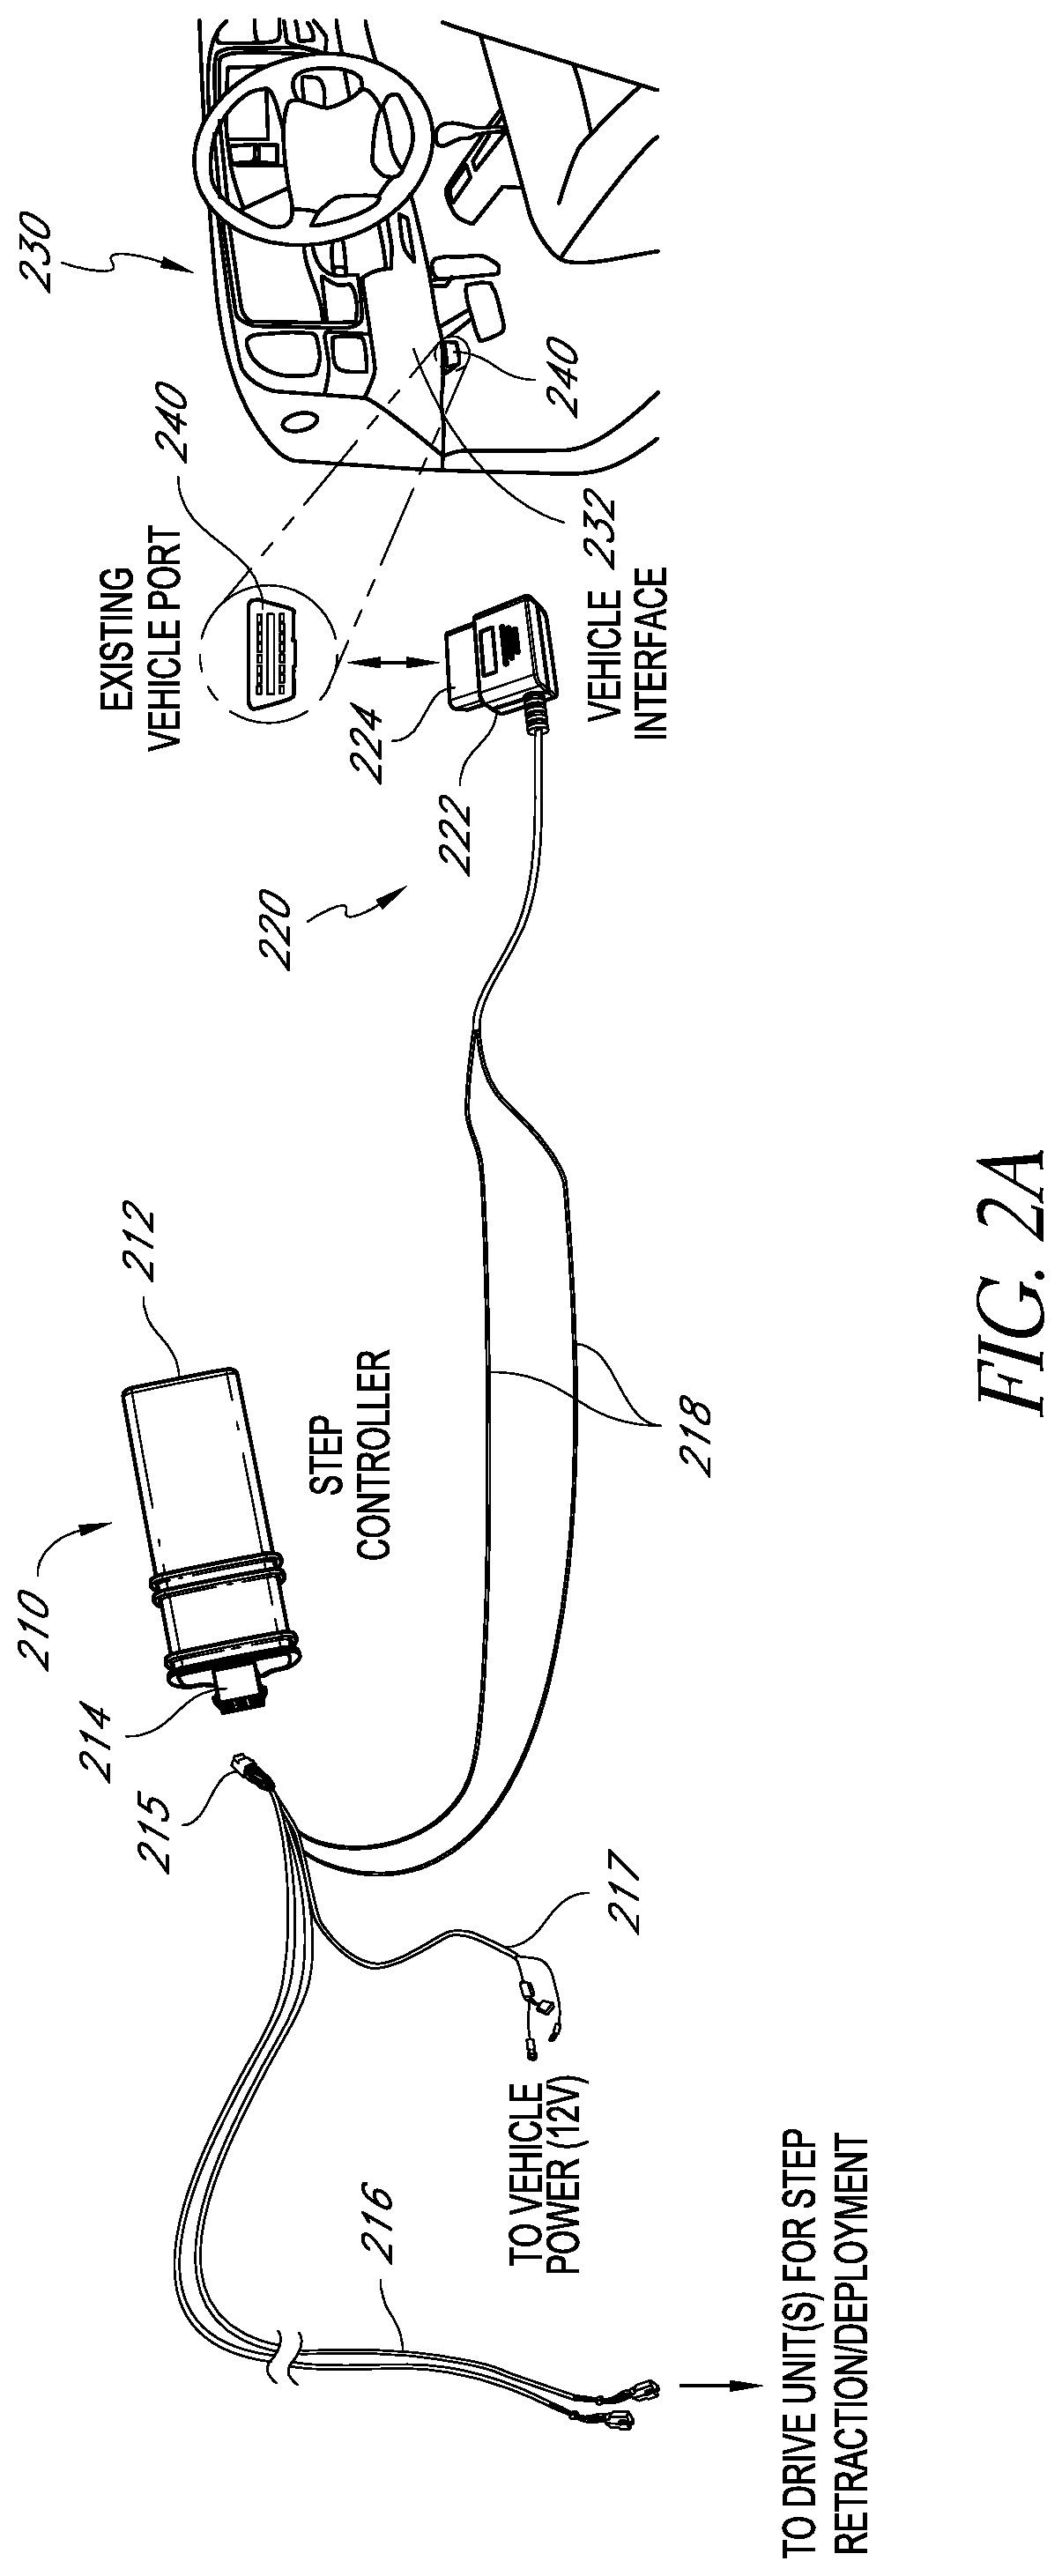 Remotely controlled vehicle step and lighting systems